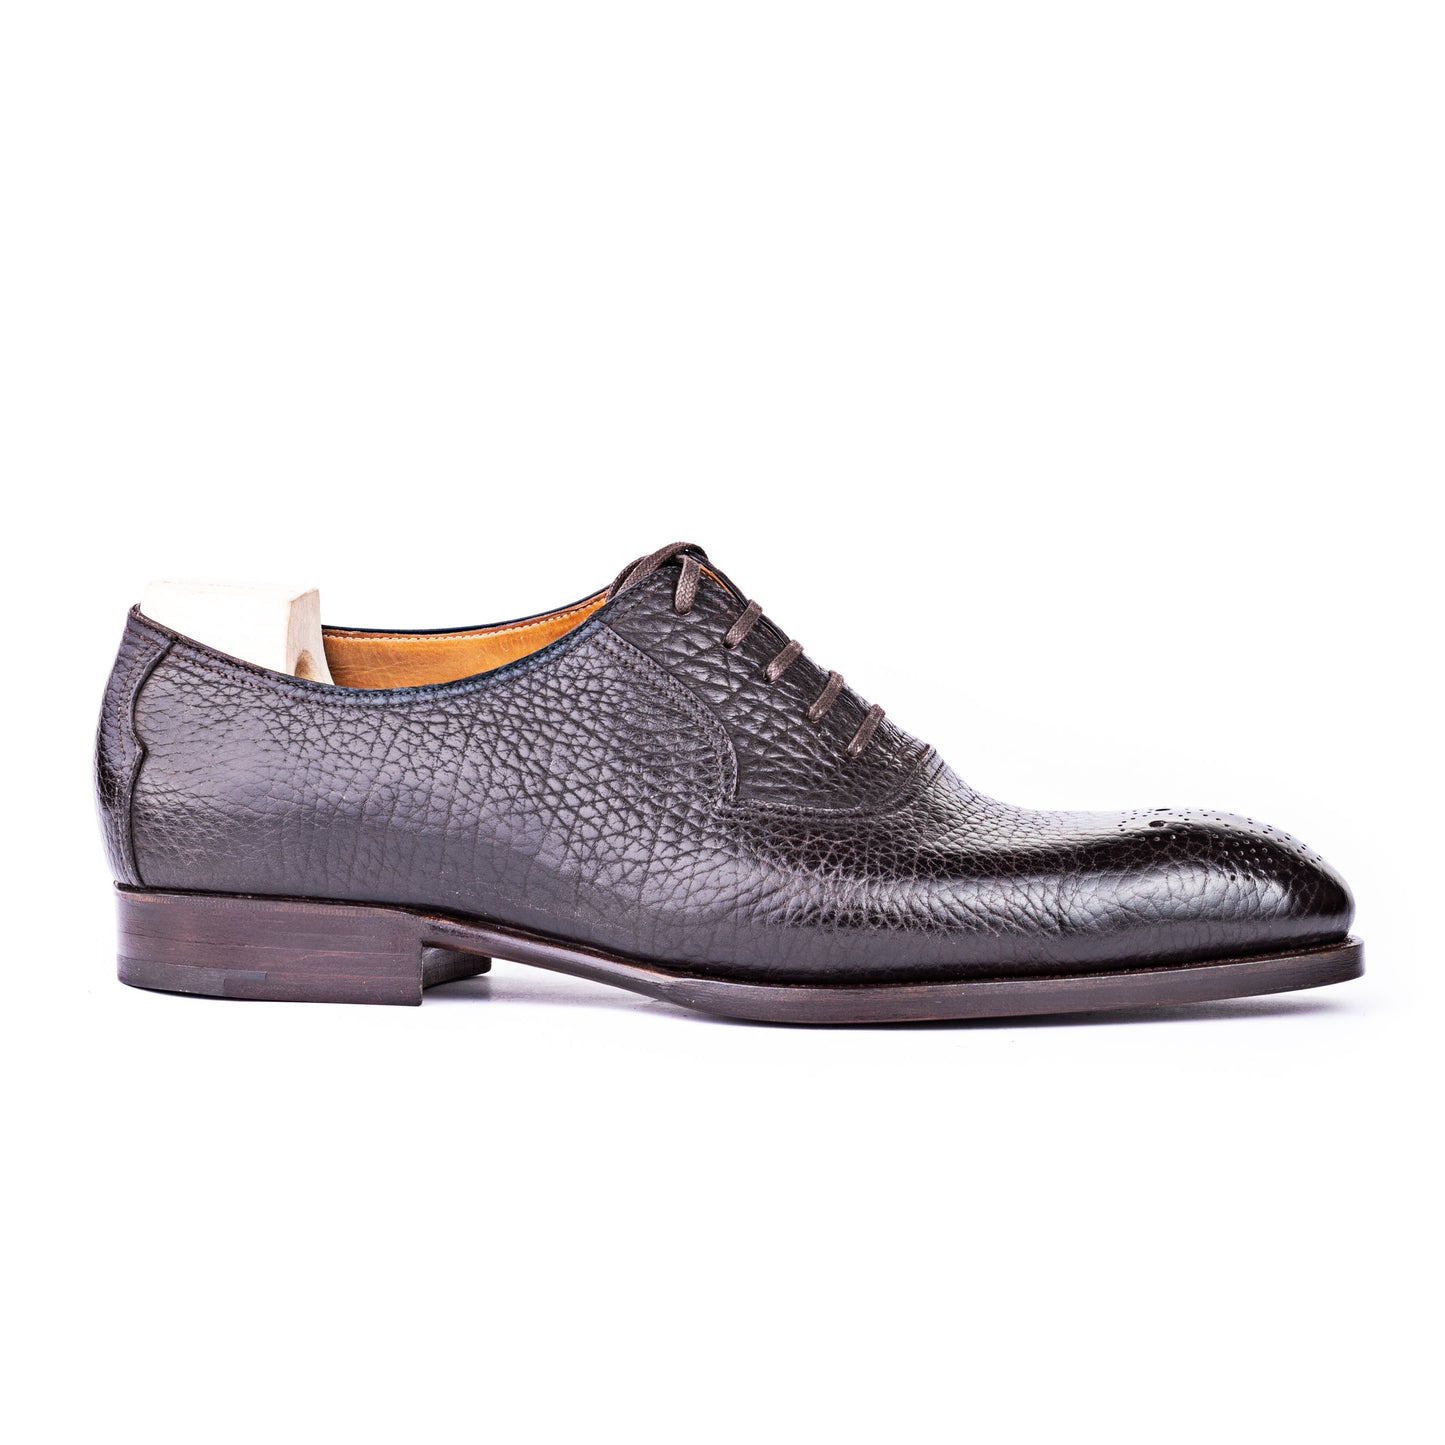 Plain oxford with perforated tip